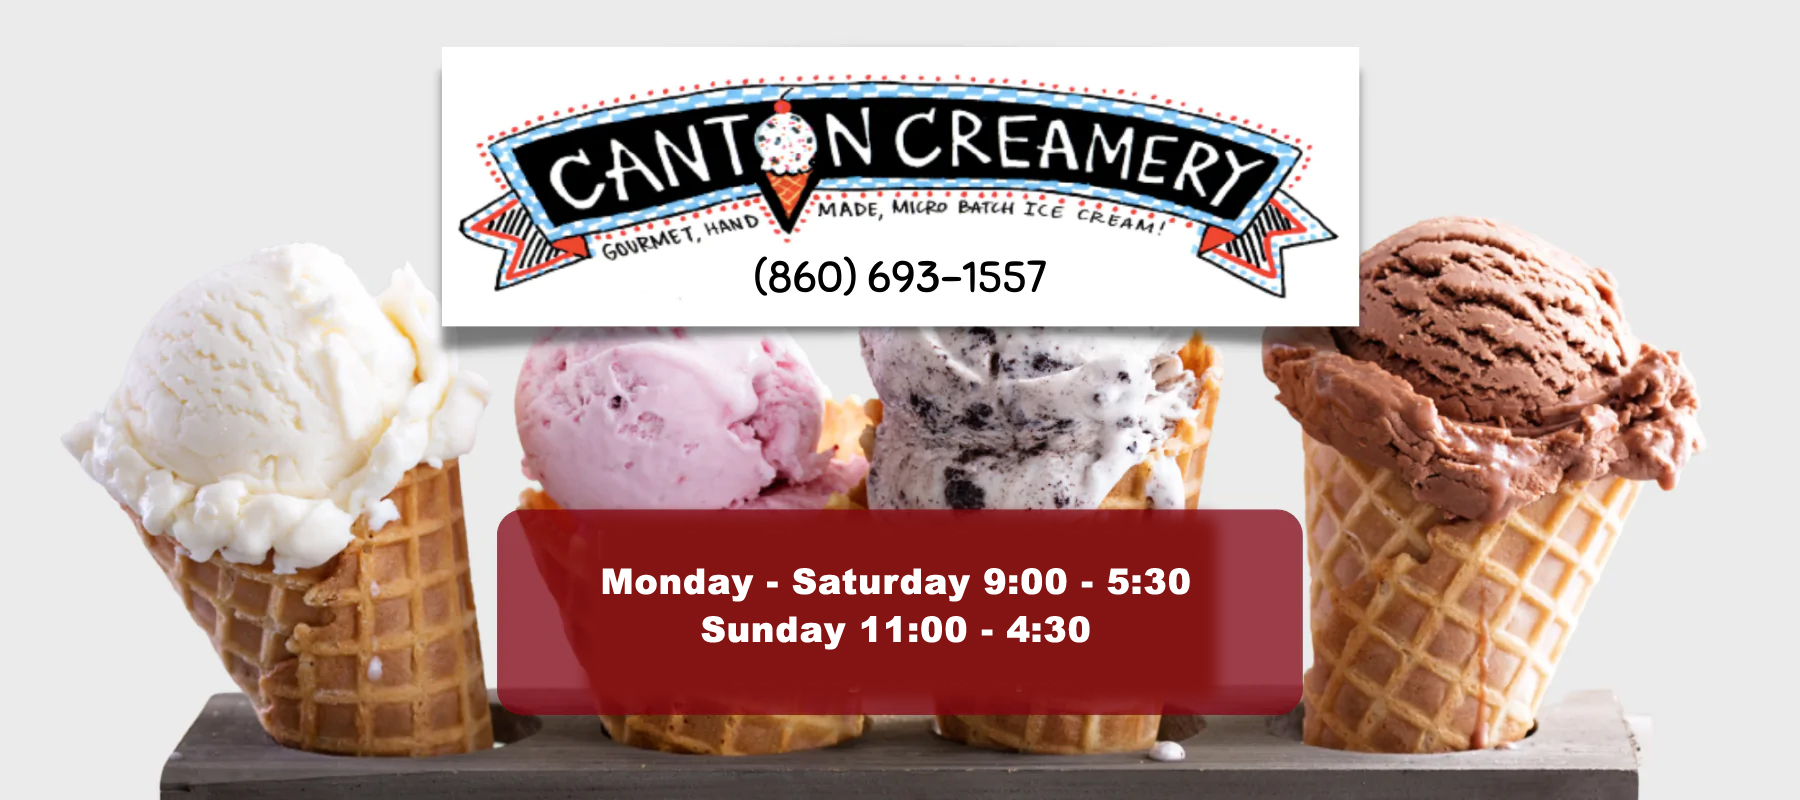 Canton Creamery ice cream at Petals and Paws Canton CT